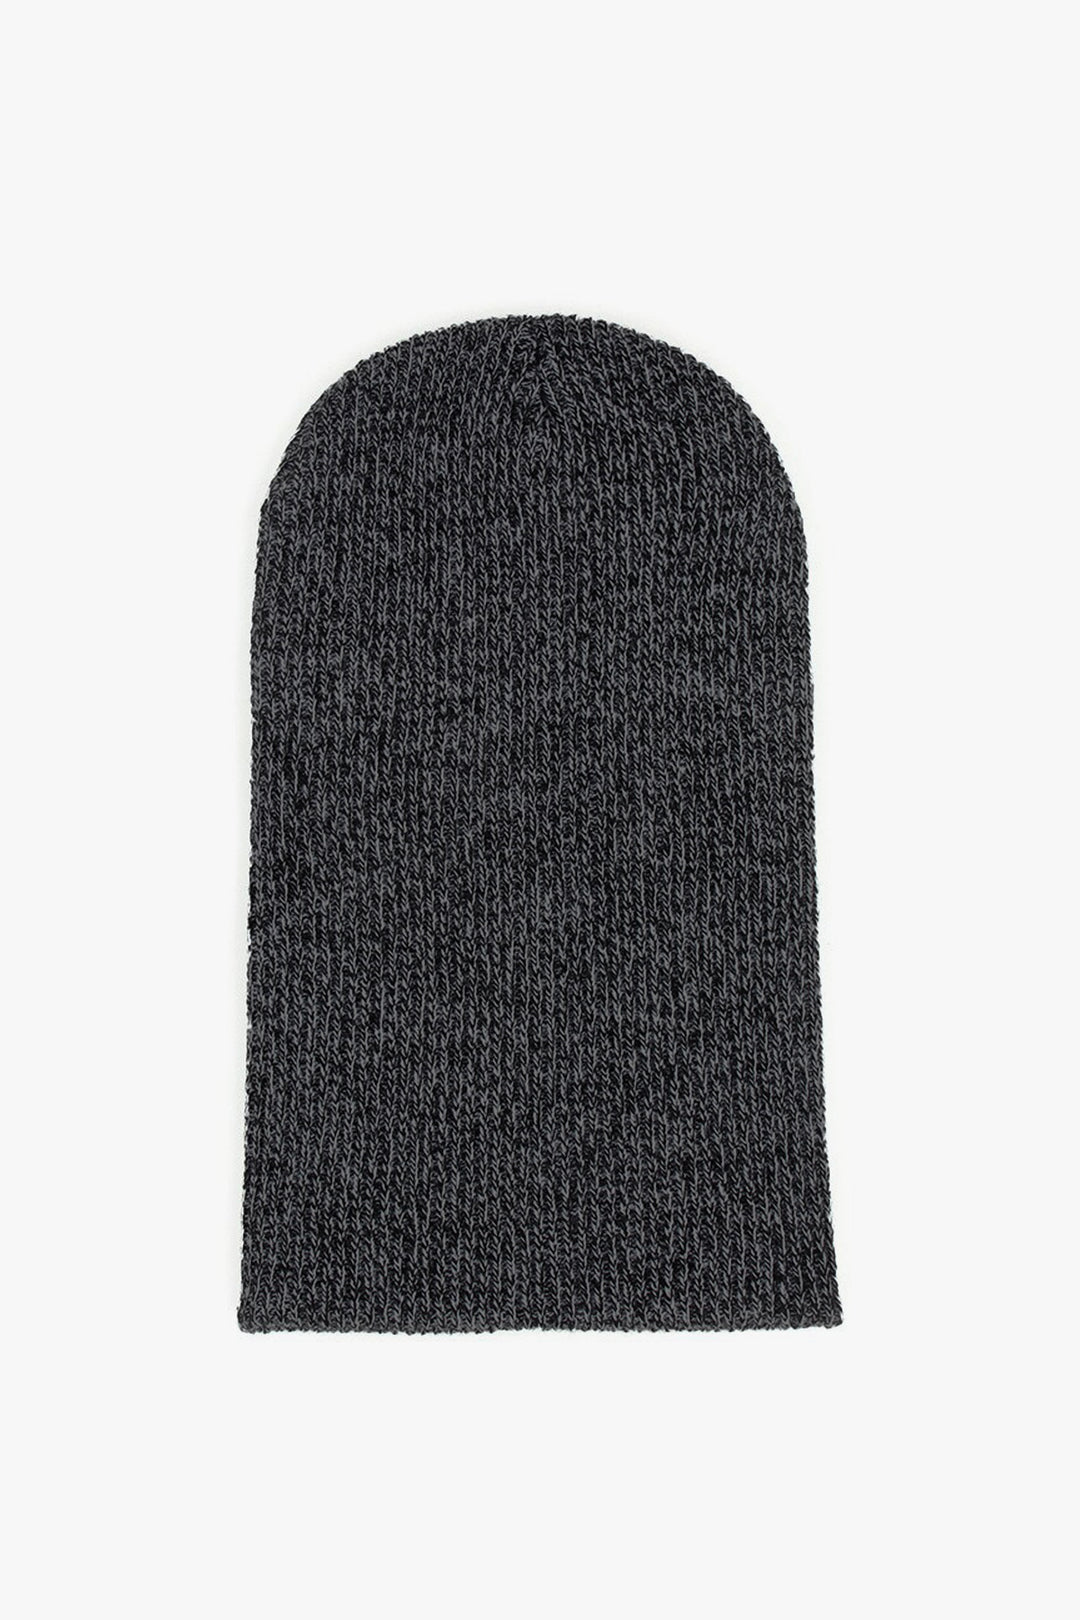 Grey Slouch Knitted Beanie - W22 - UBH0007